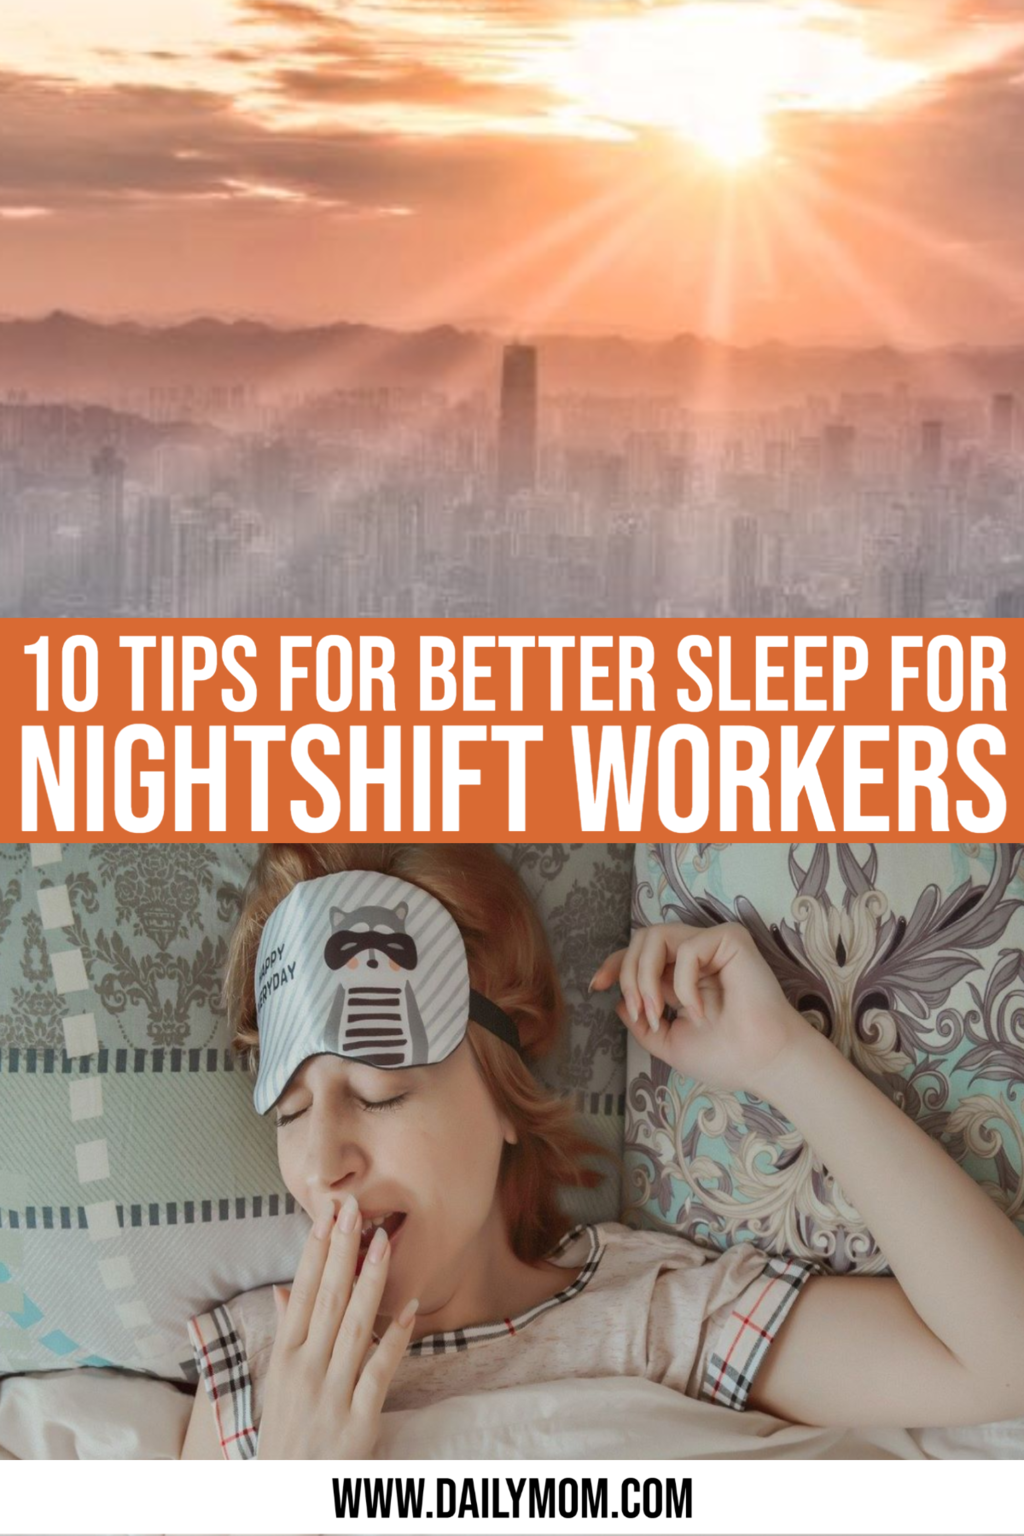 10 Things Night Shift Workers Should Do To Get Better Sleep